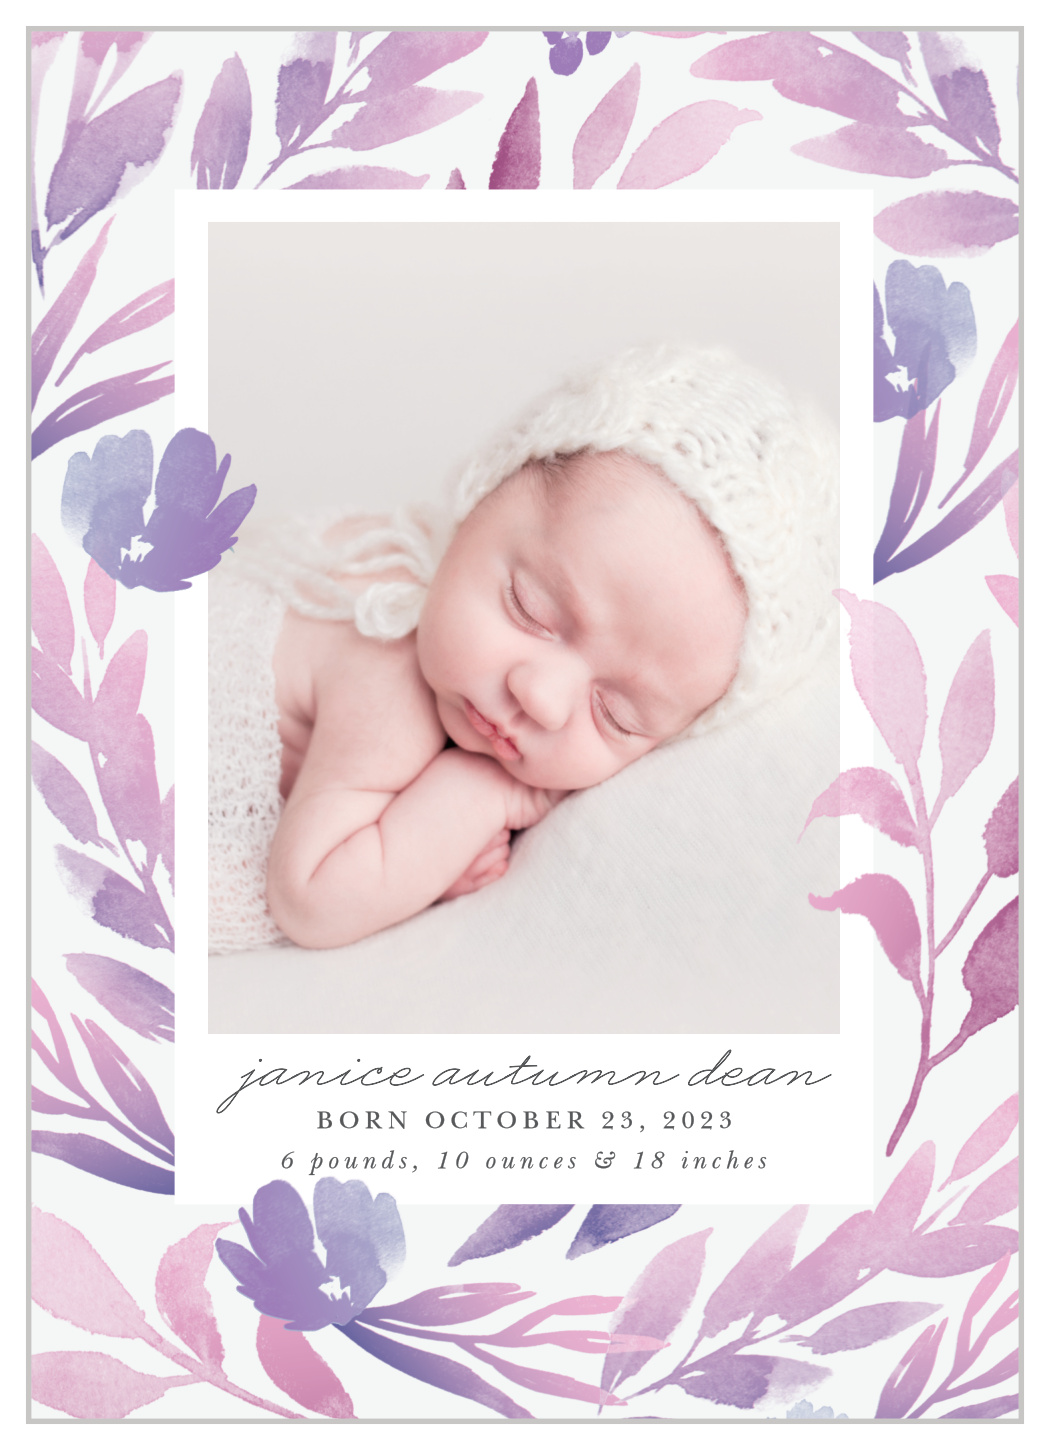 Lilac Blooms Birth Announcements